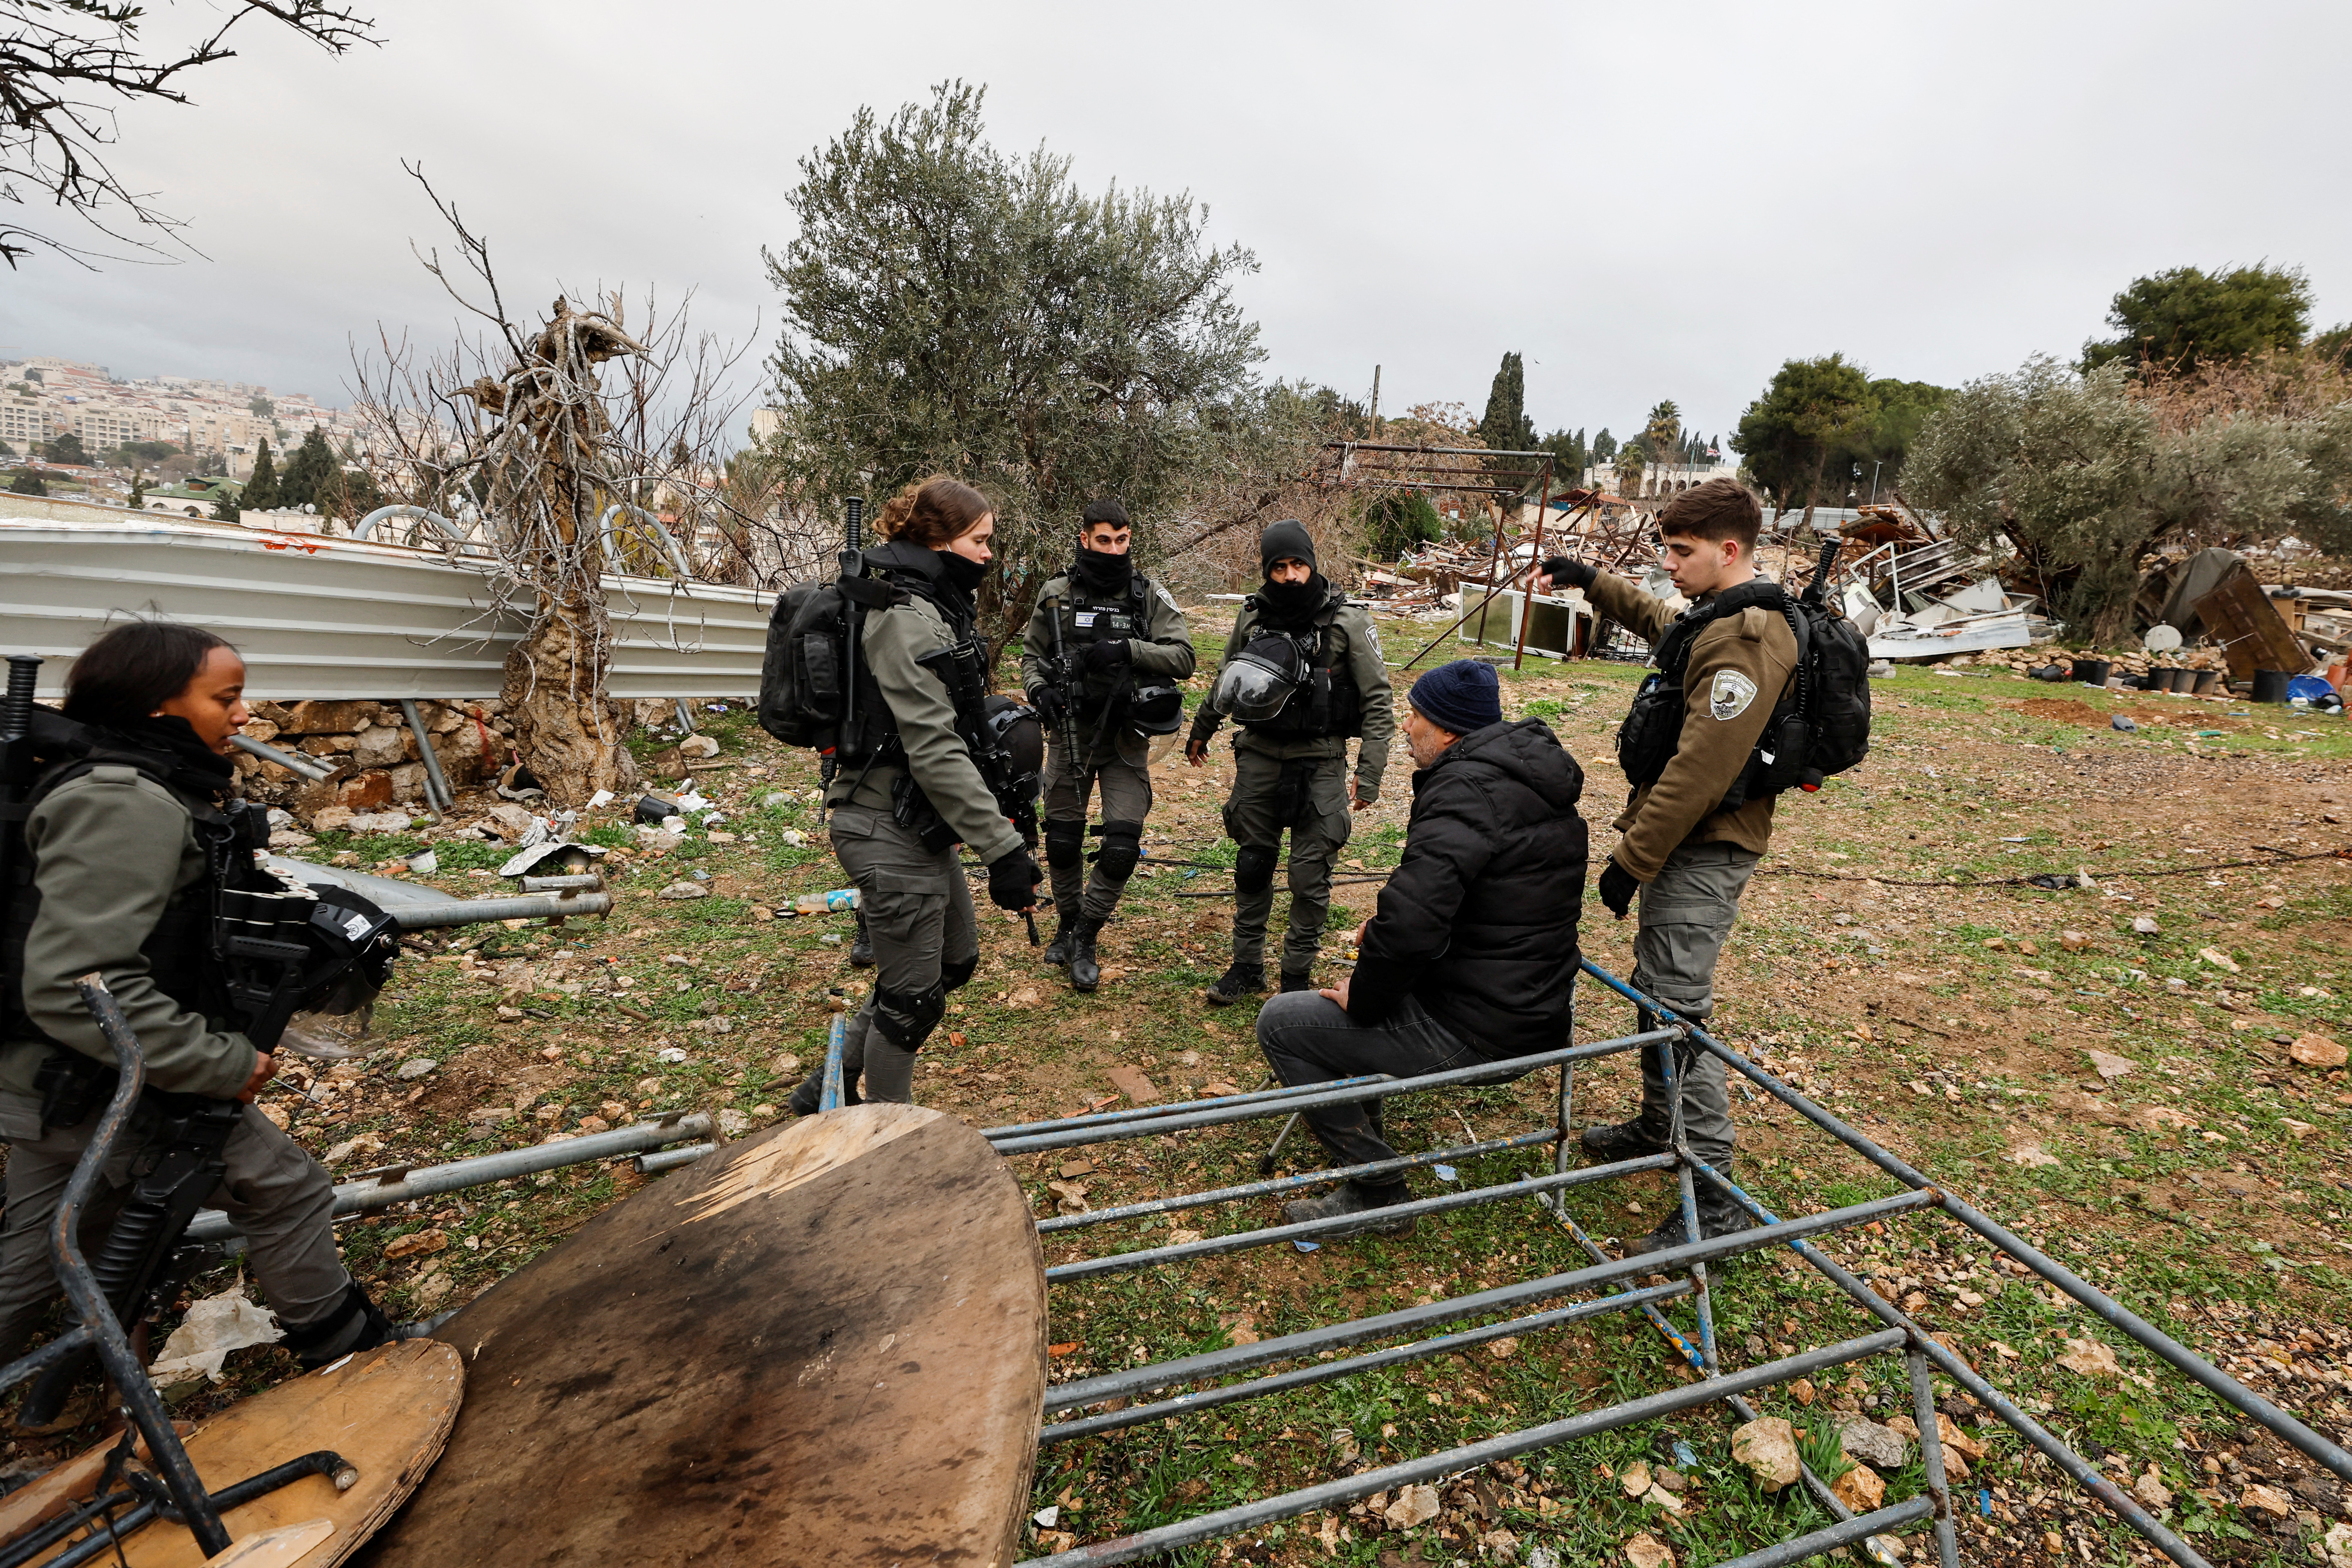 Members of the Israeli border police speak with a Palestinian man at the site of a demolished house in the Sheikh Jarrah neighbourhood of East Jerusalem